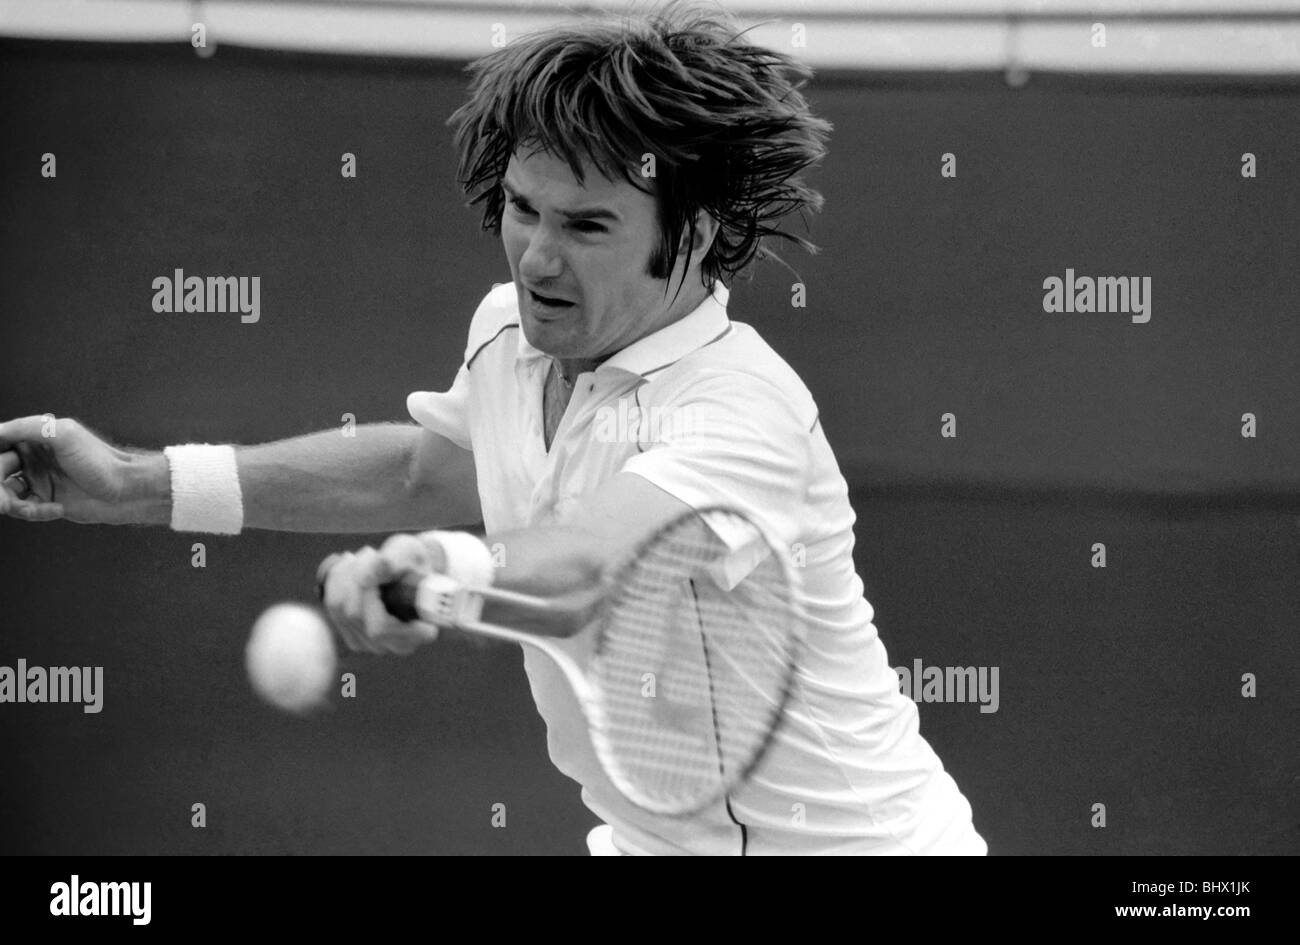 Wimbledon 3rd Day: Jimmy Connors in action. June 1981 81-3579-008 Stock Photo